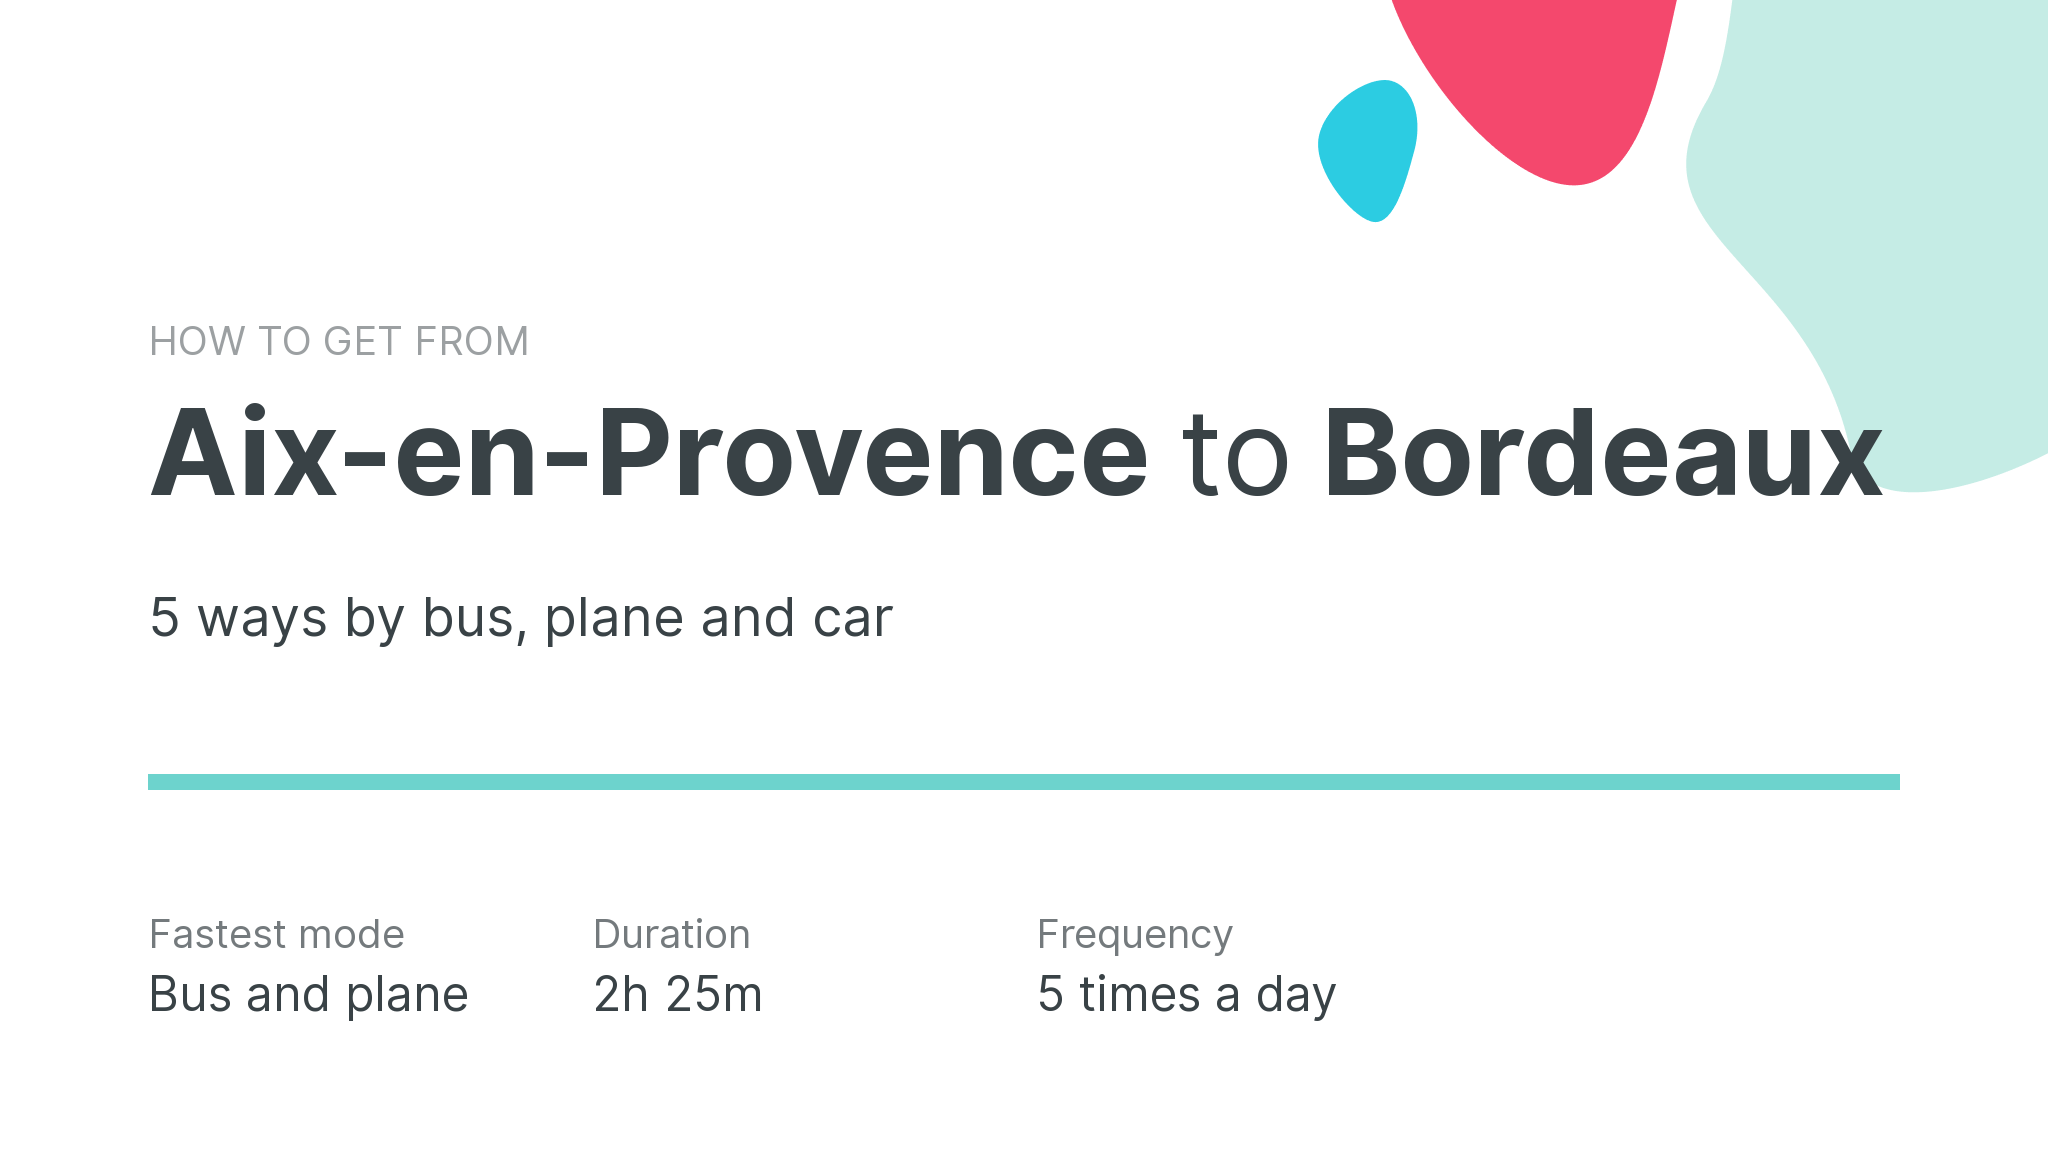 How do I get from Aix-en-Provence to Bordeaux